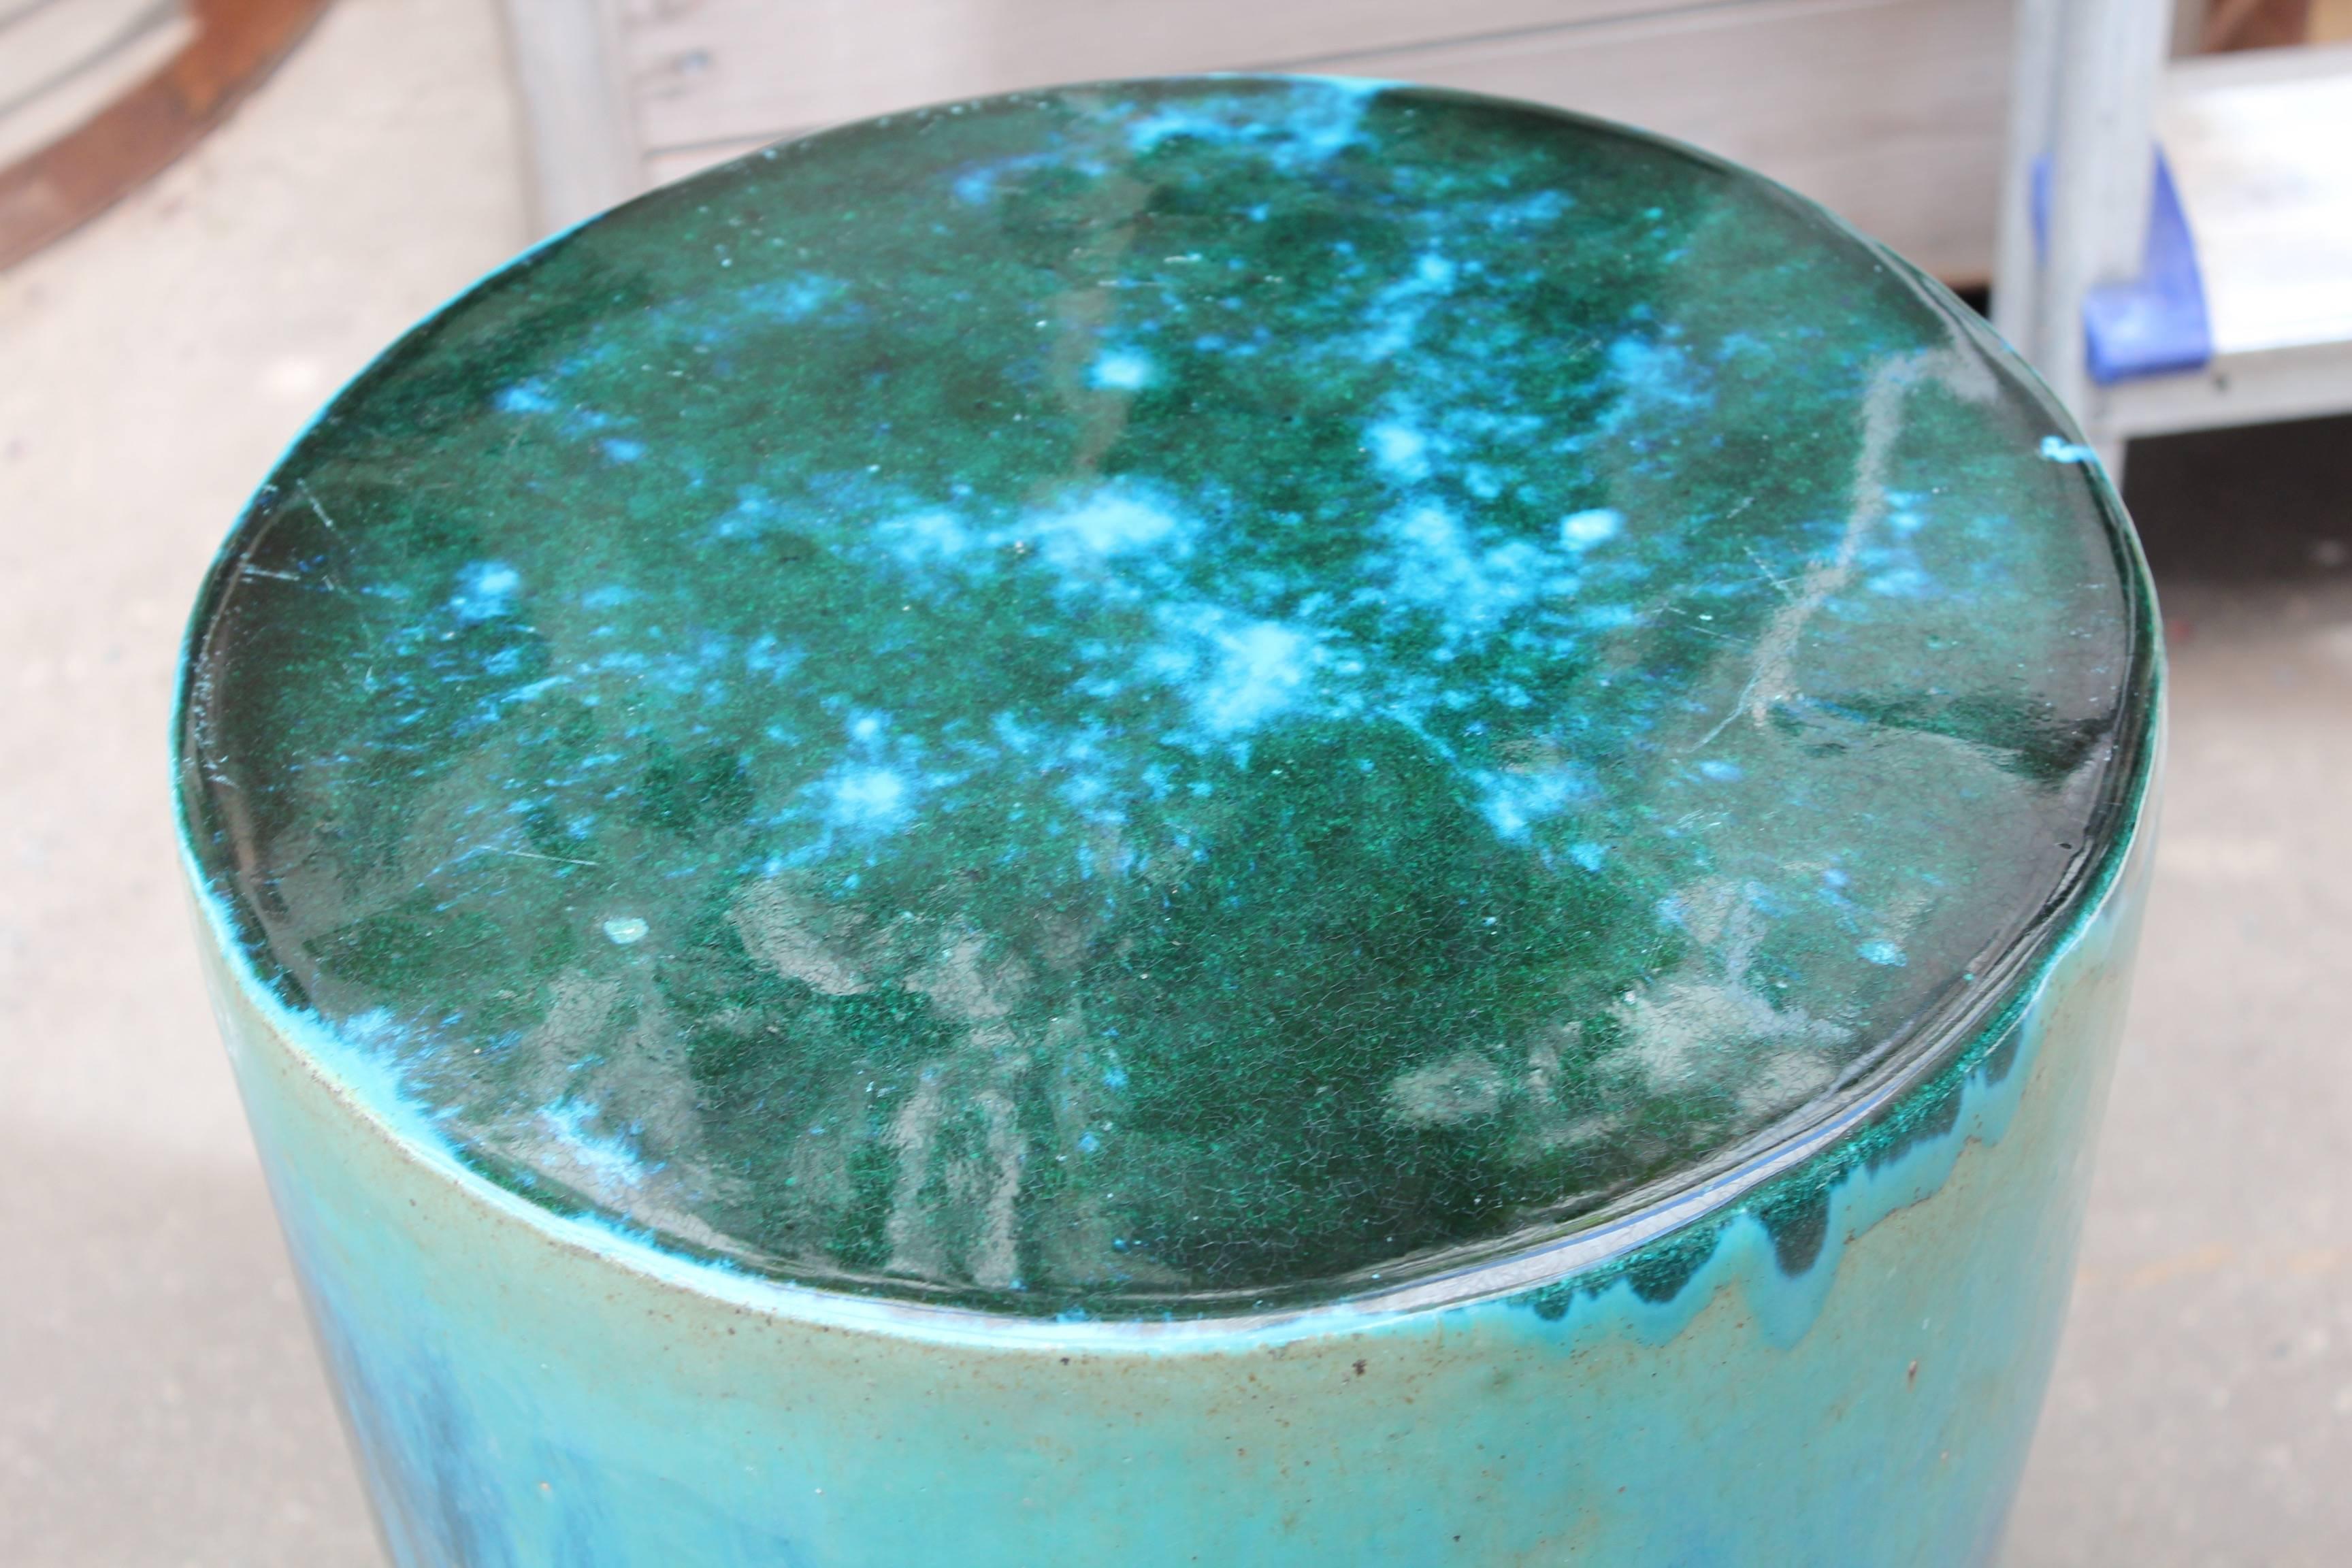 Other Green and Blue Dipped Glazed Ceramic Garden Stools